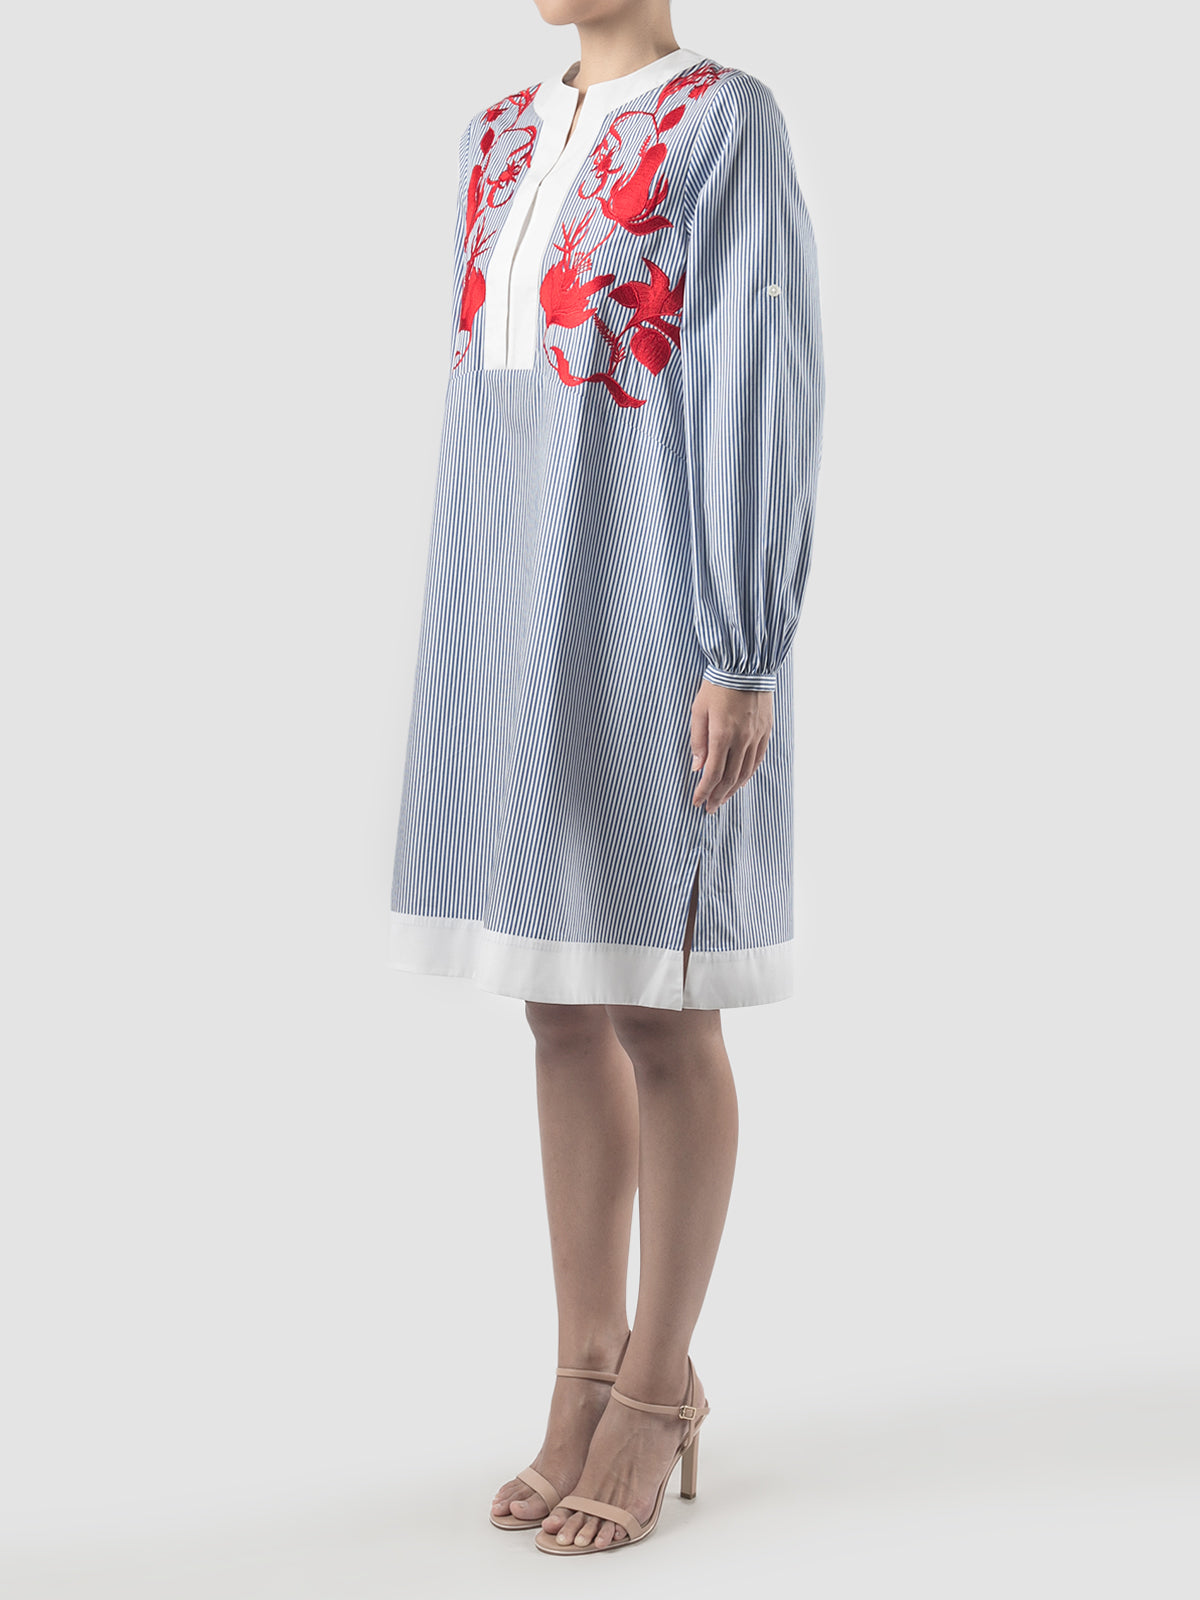 Blue Ixora midi dress with red embroidery